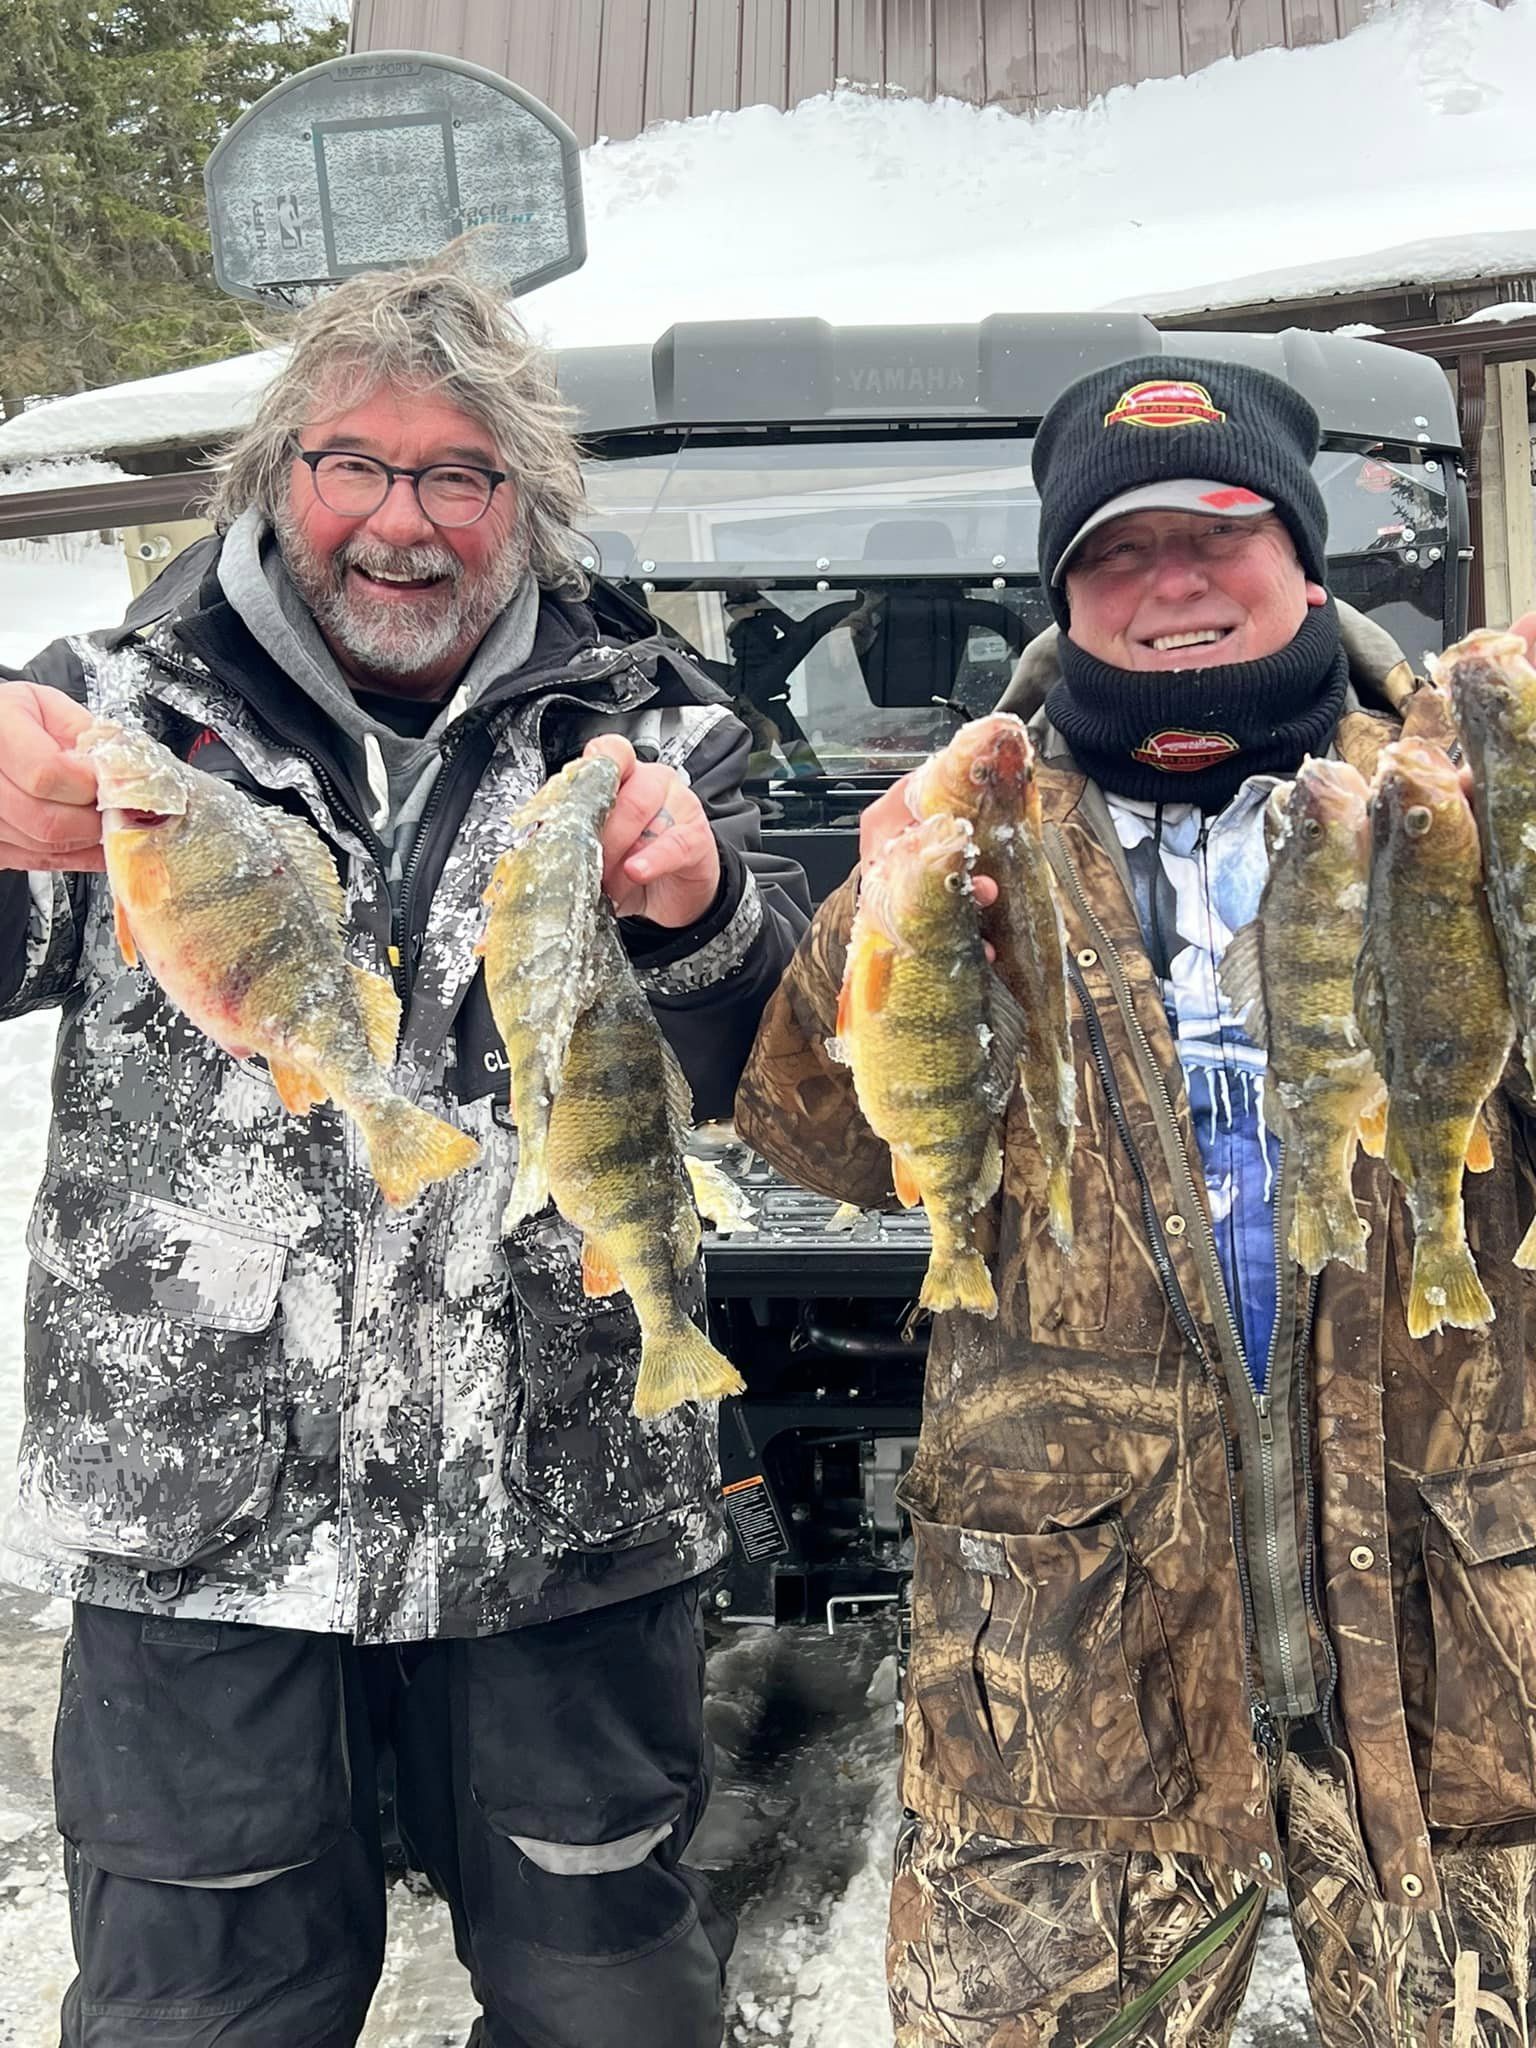 Incredible Canadian Winter Allows for some Awesome Ice Fishing